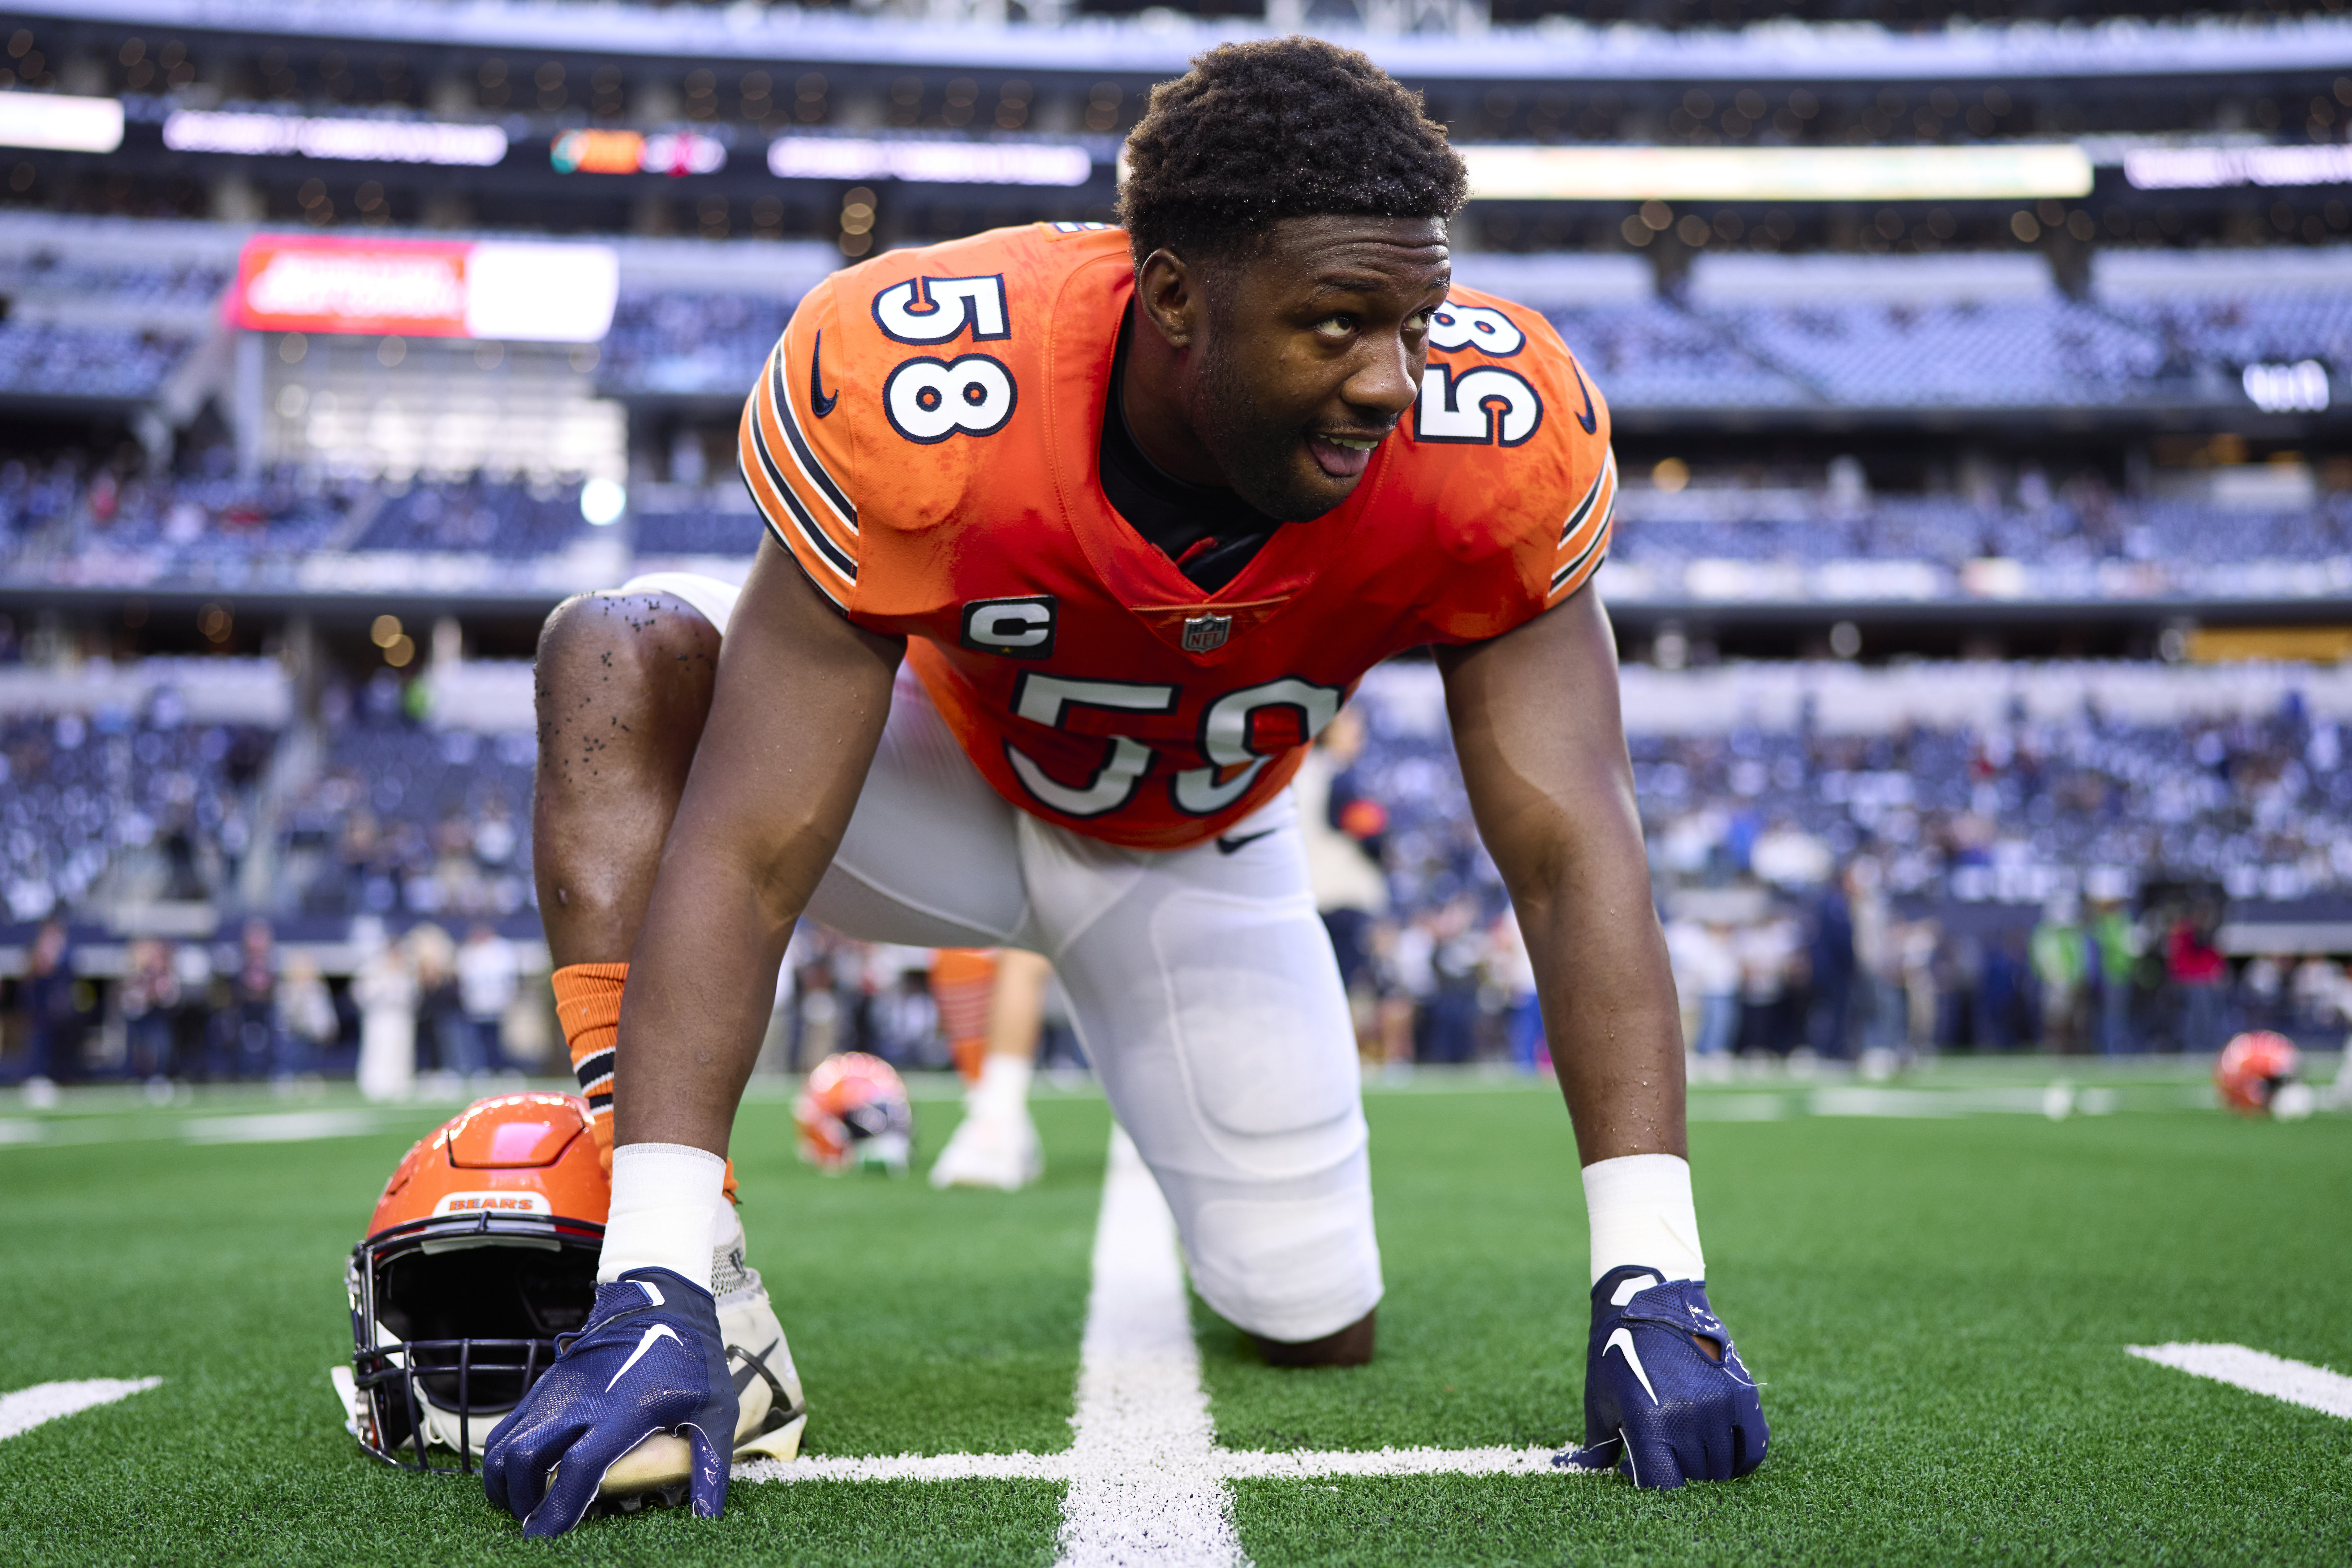 Linebacker Roquan Smith of the Chicago Bears looks on in the game against the Dallas Cowboys at AT&T Stadium in Arlington, Texas, October 30, 2022. /CFP